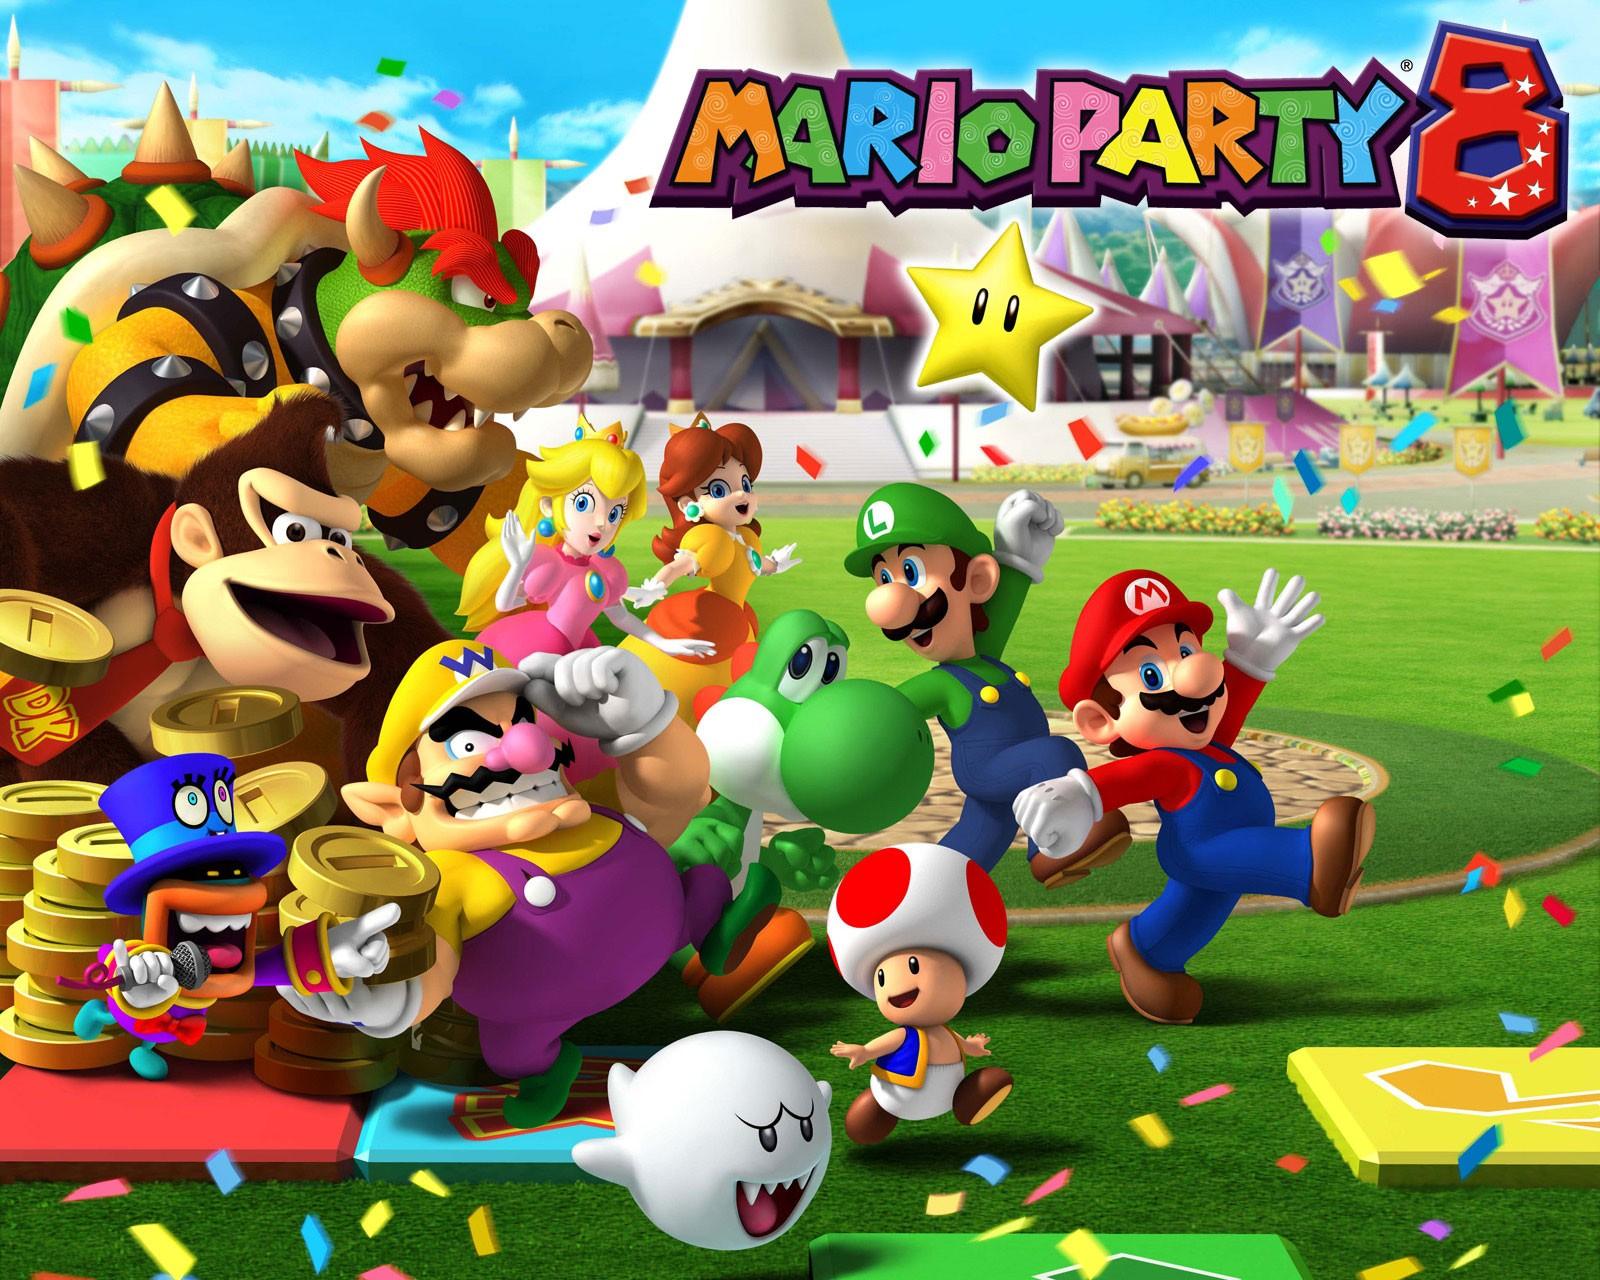 1600 x 1280 · jpeg - Mario Party 8 Wallpaper and Background Image | 1600x1280